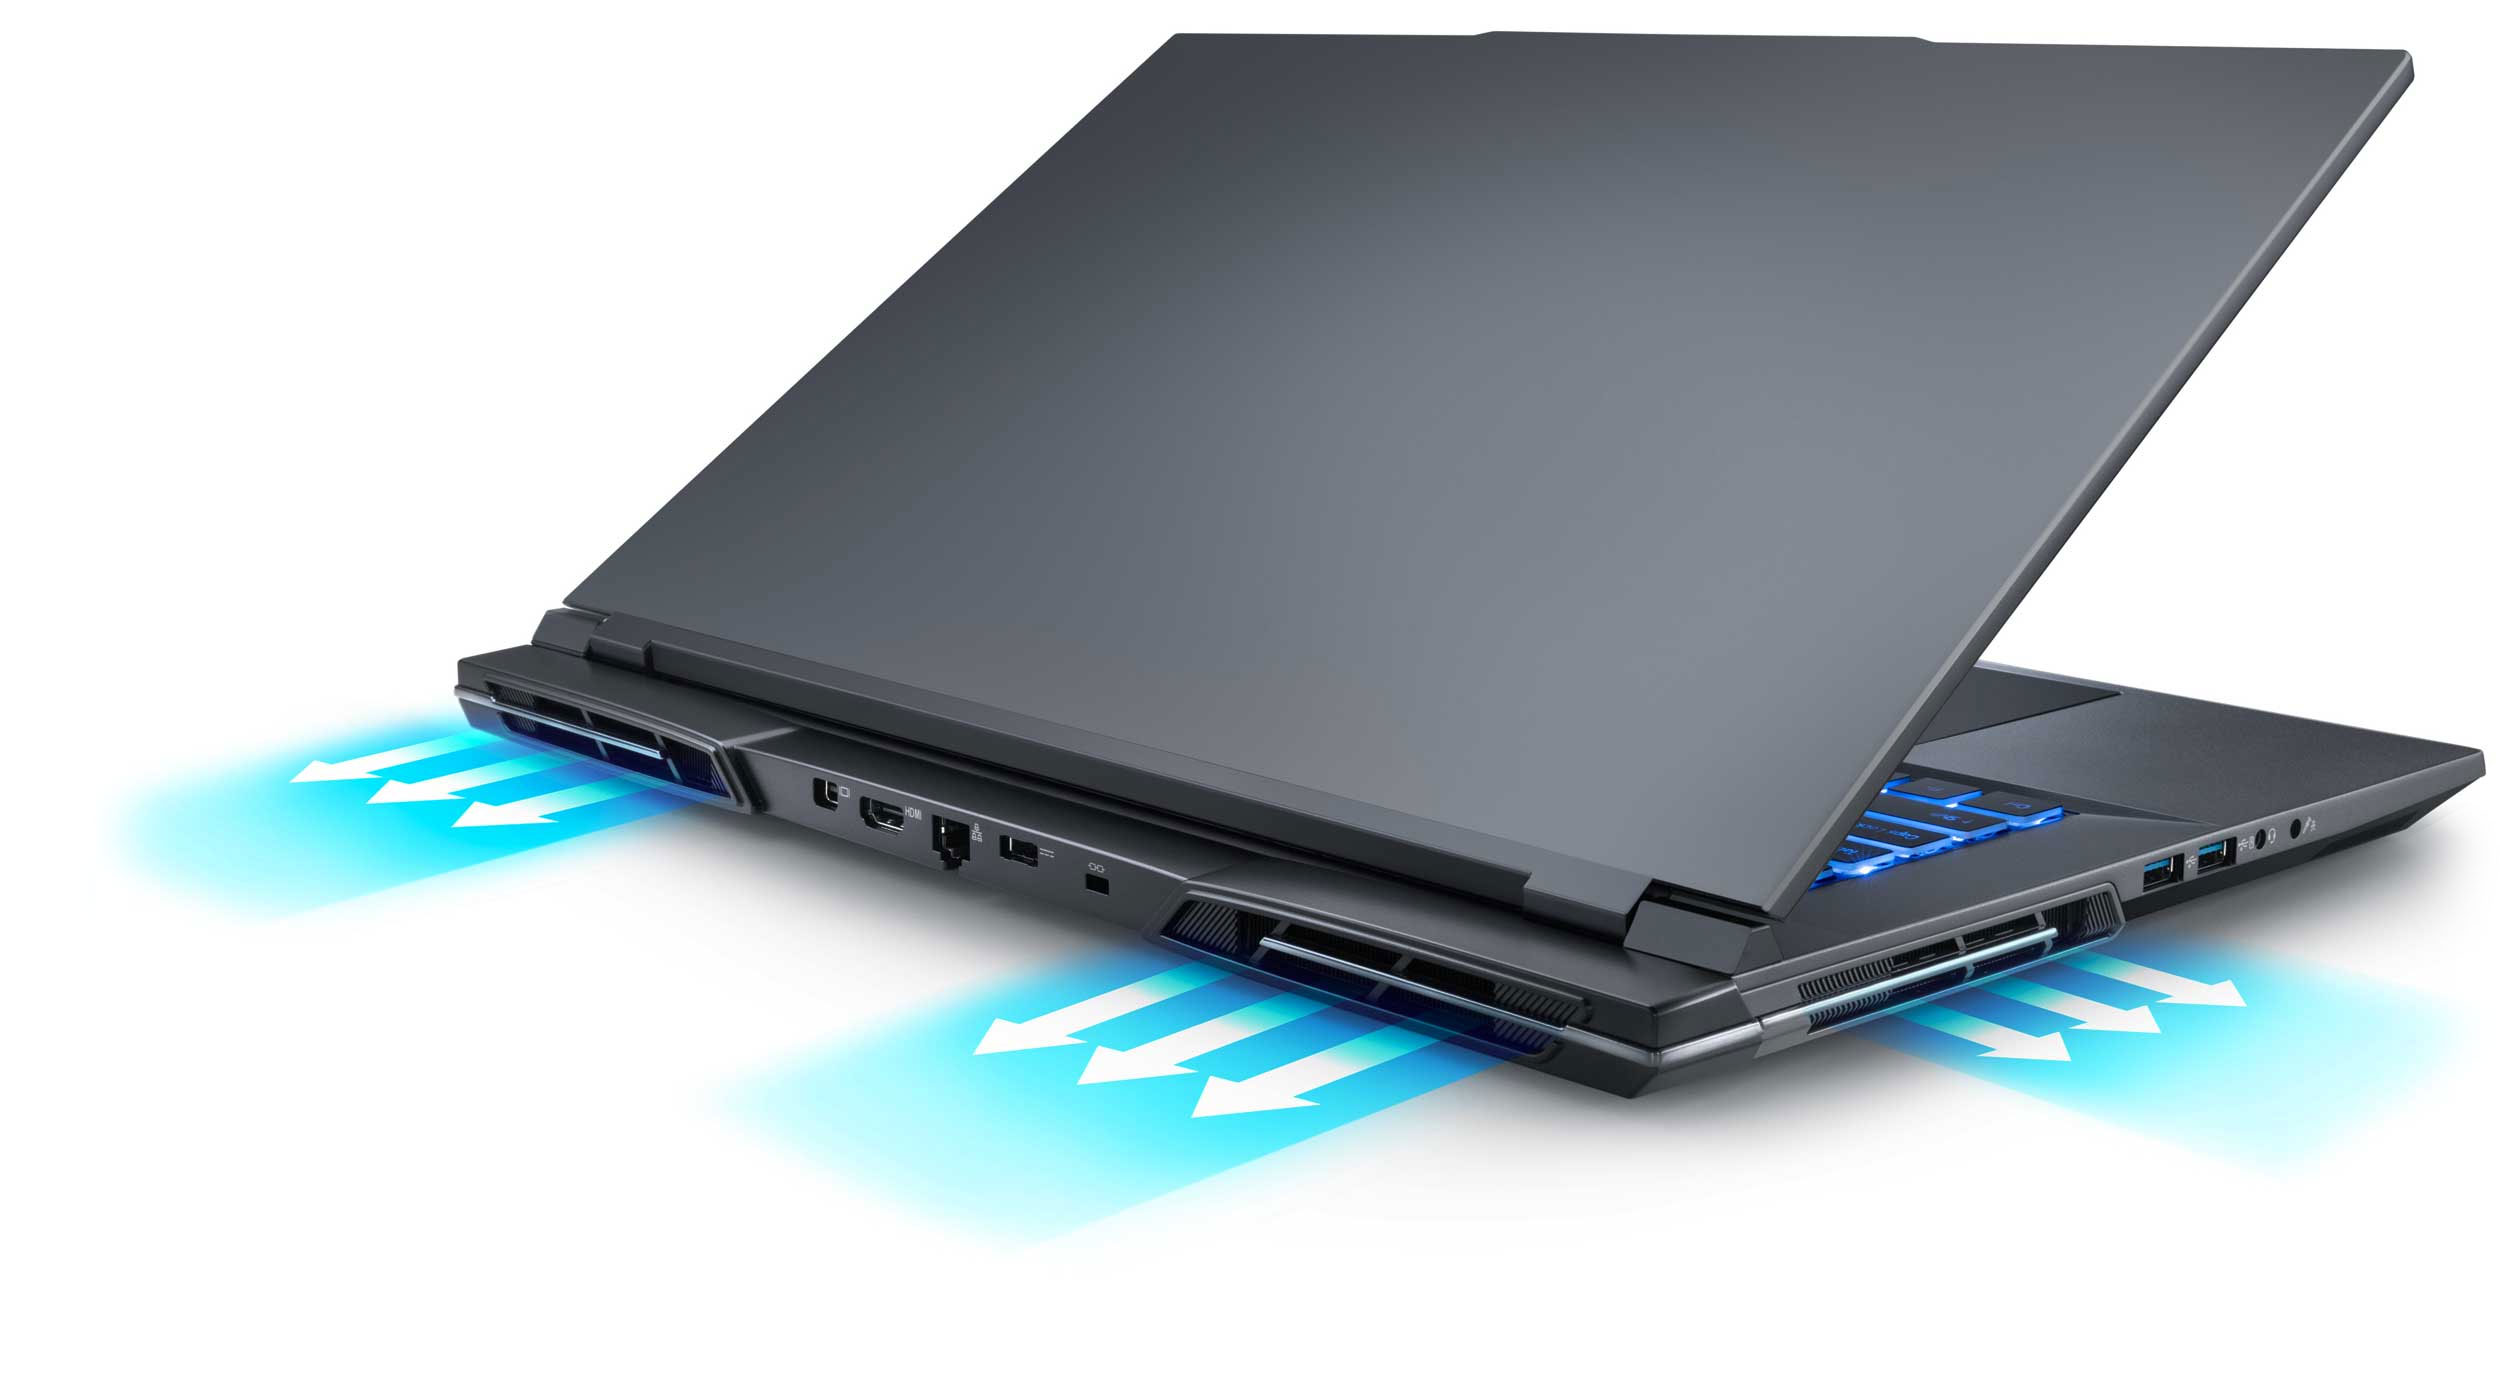 Avon laptop highlighting its three air exits cooling system